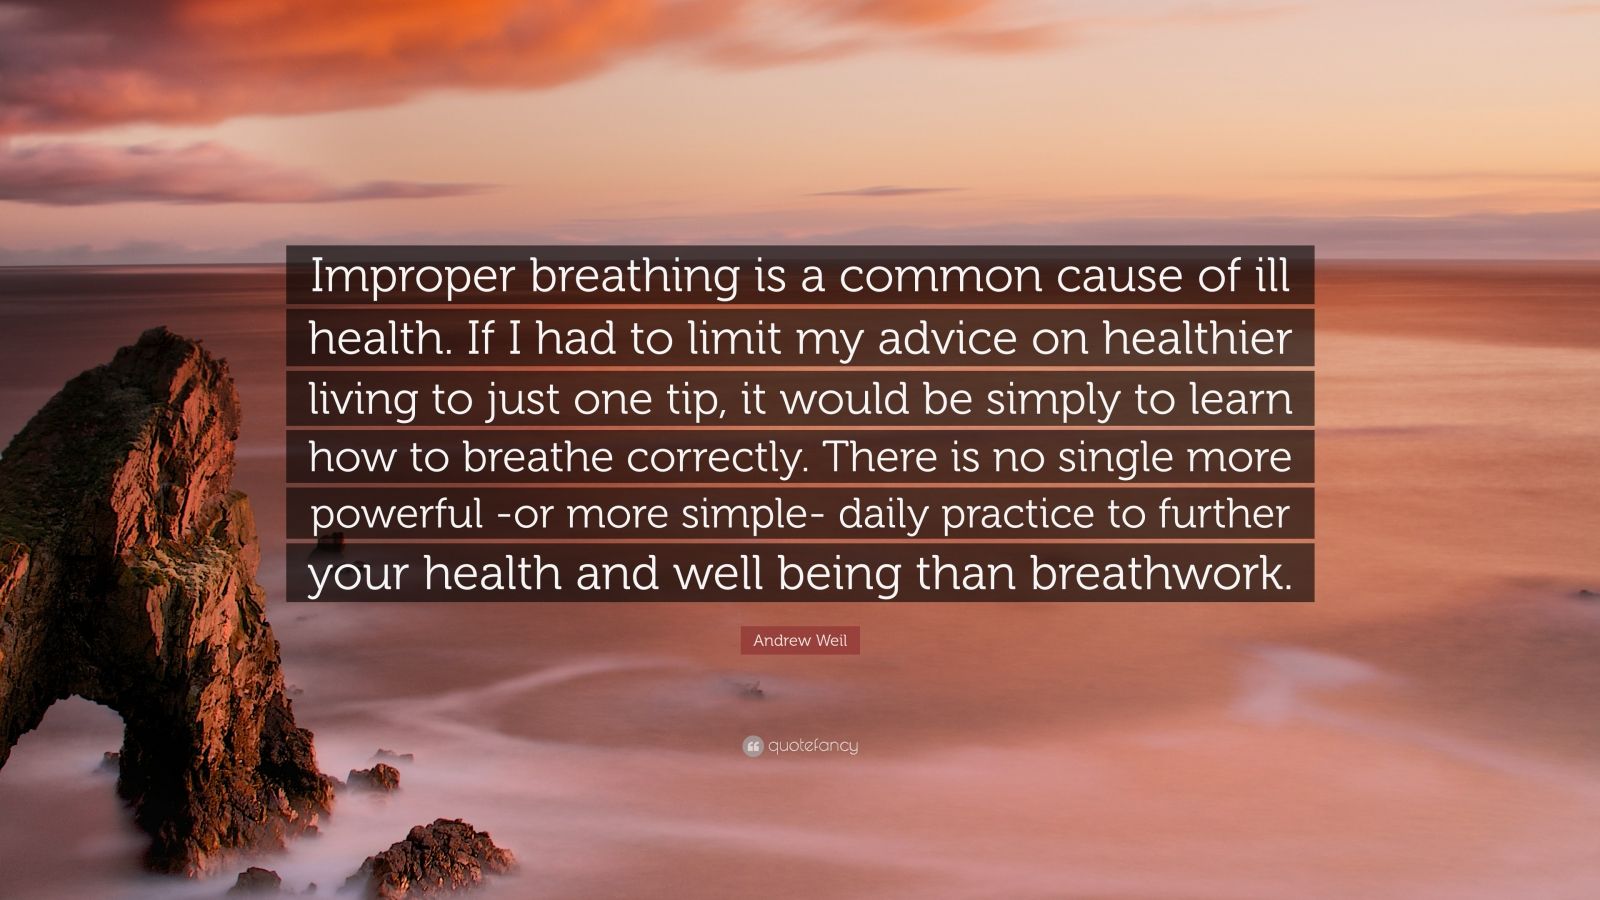 Andrew Weil Quote: “Improper breathing is a common cause of ill health